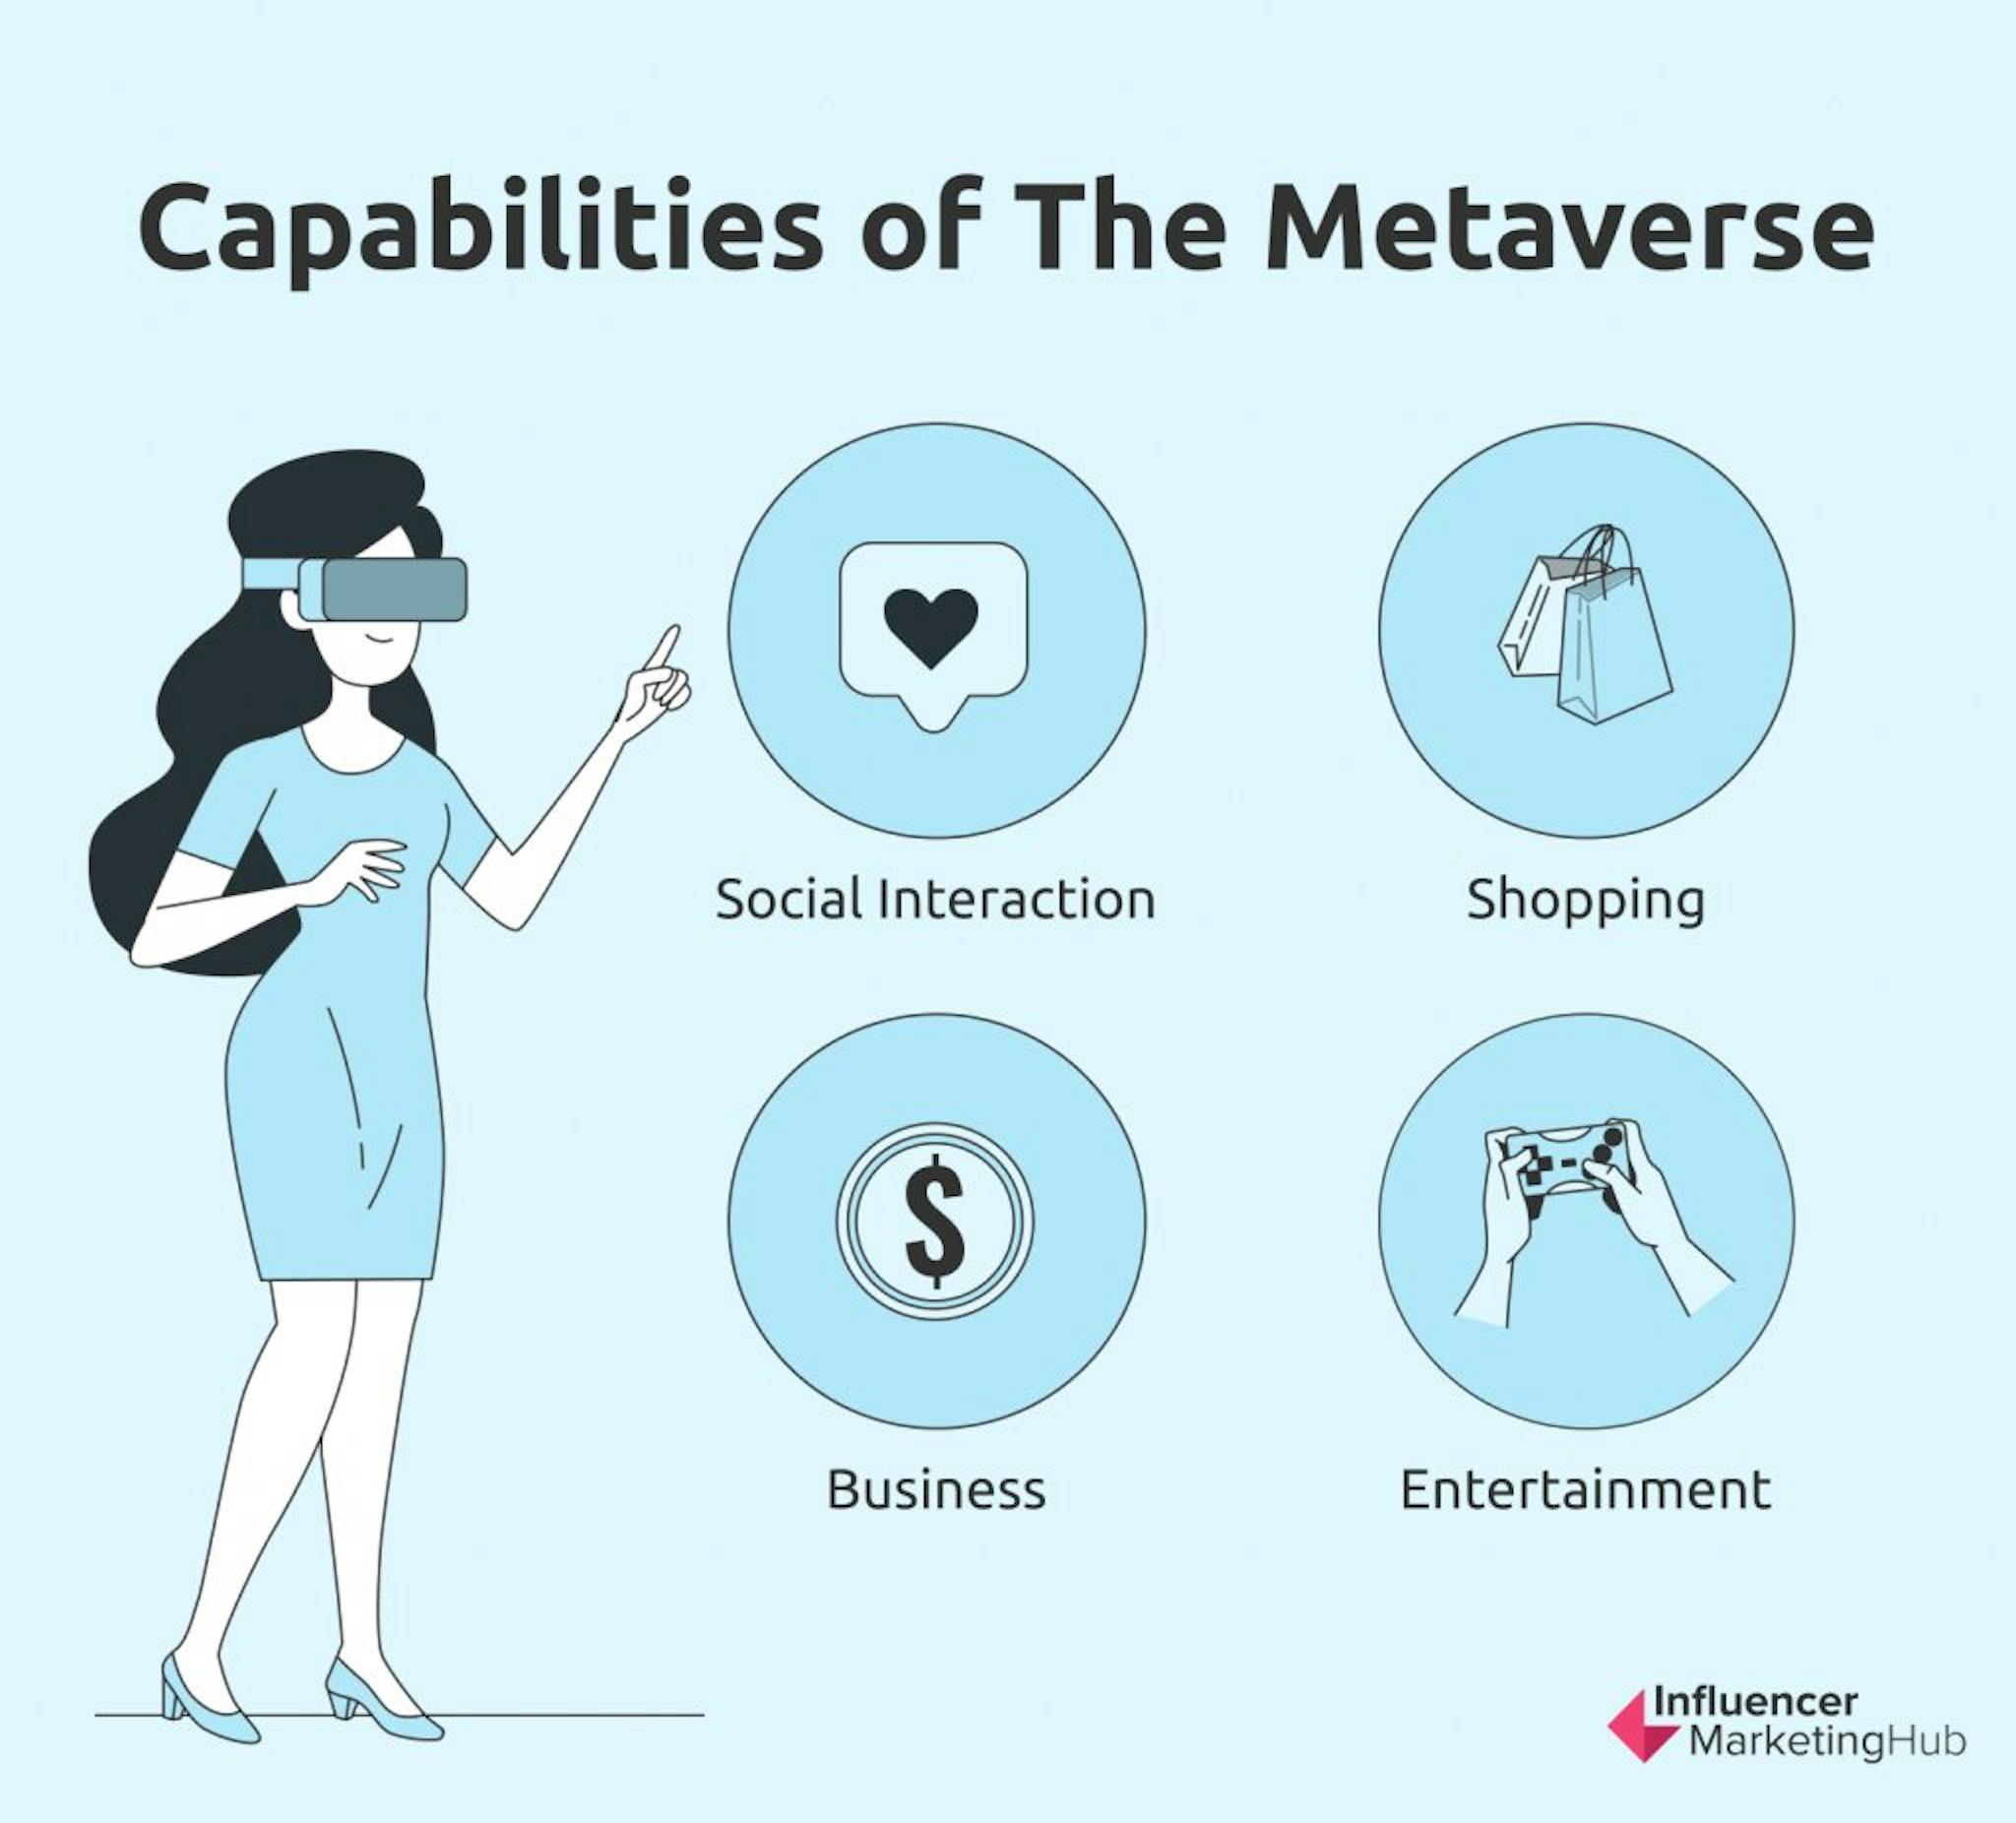 Things you can do in the metaverse. Source: Influencermarketinghub.com